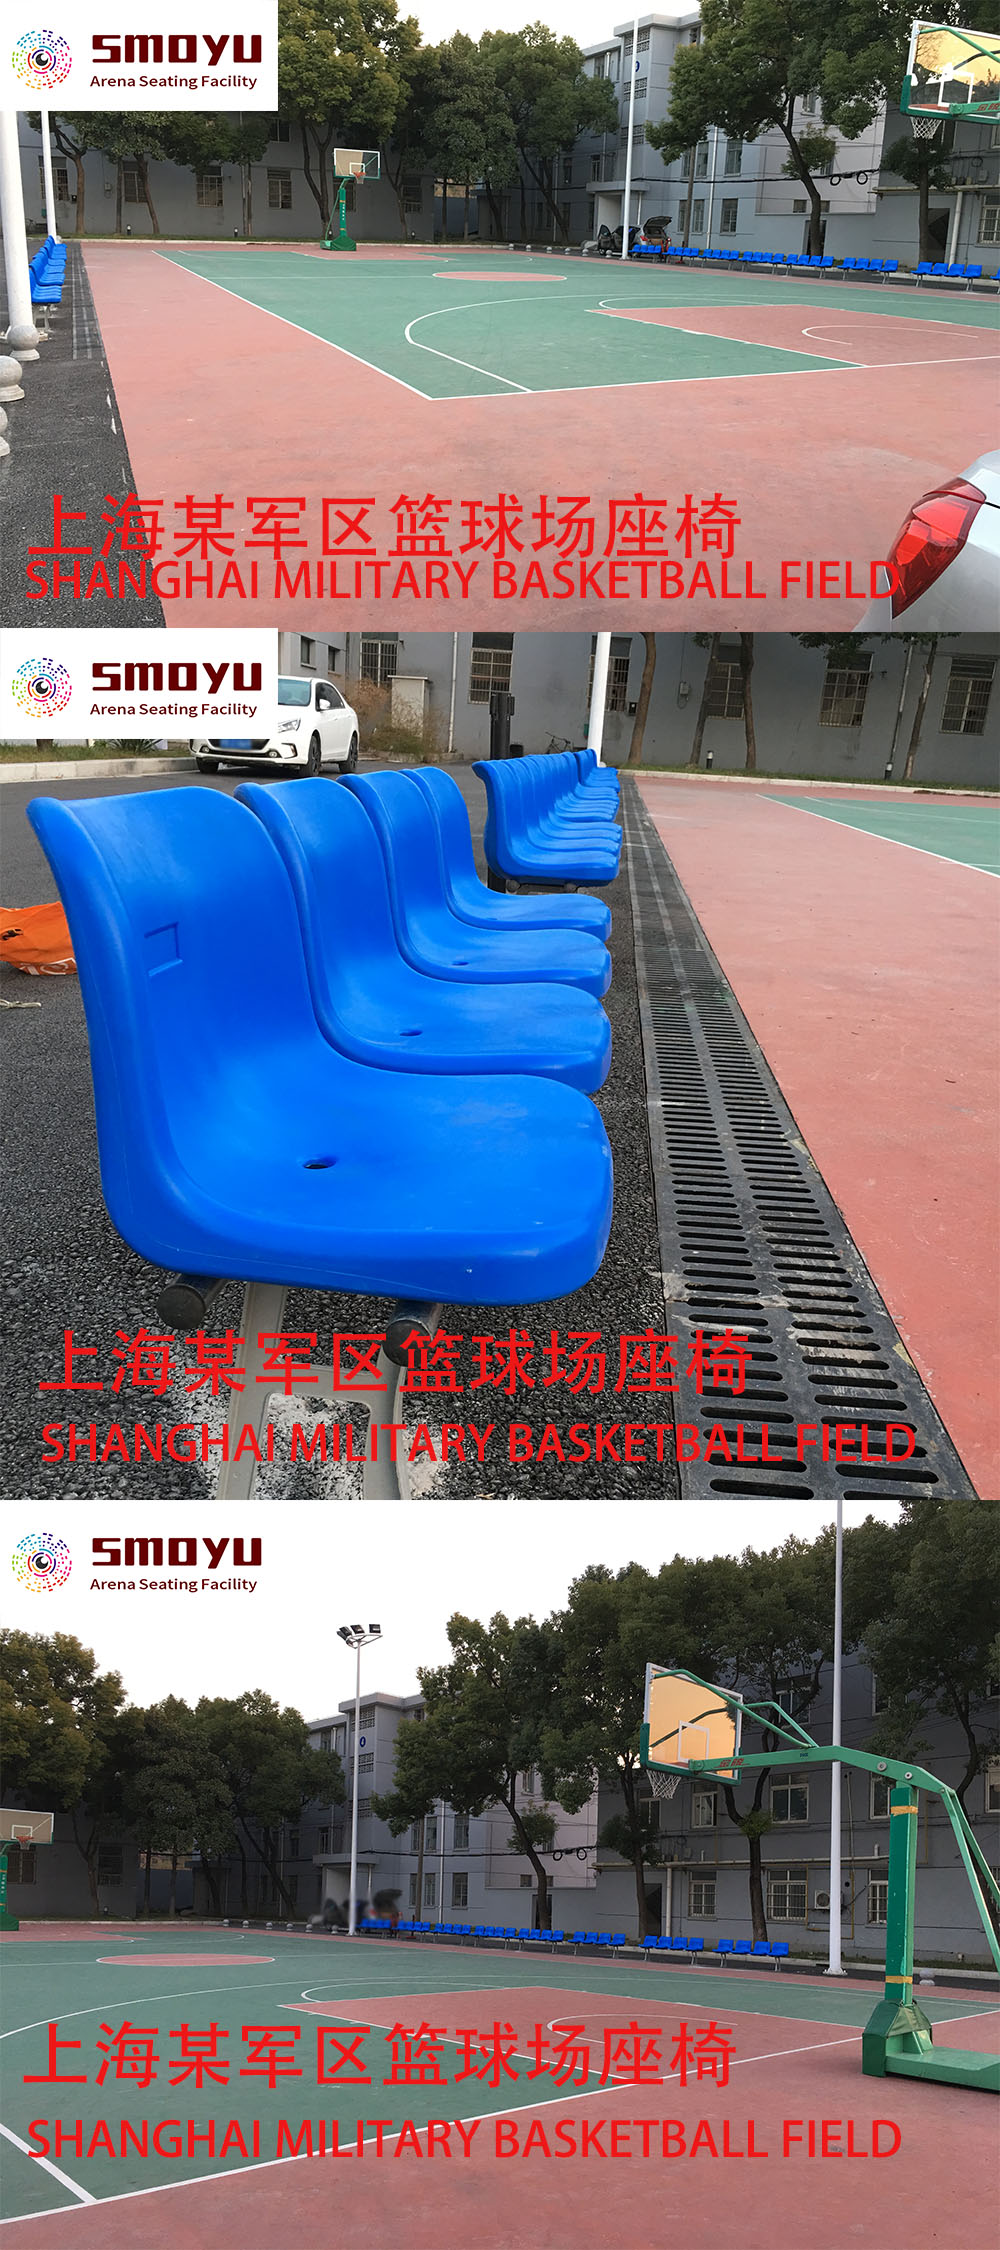 outdoor <a href=https://www.arena-seating.com/Stadium-seating.html target='_blank'>stadium seating</a>